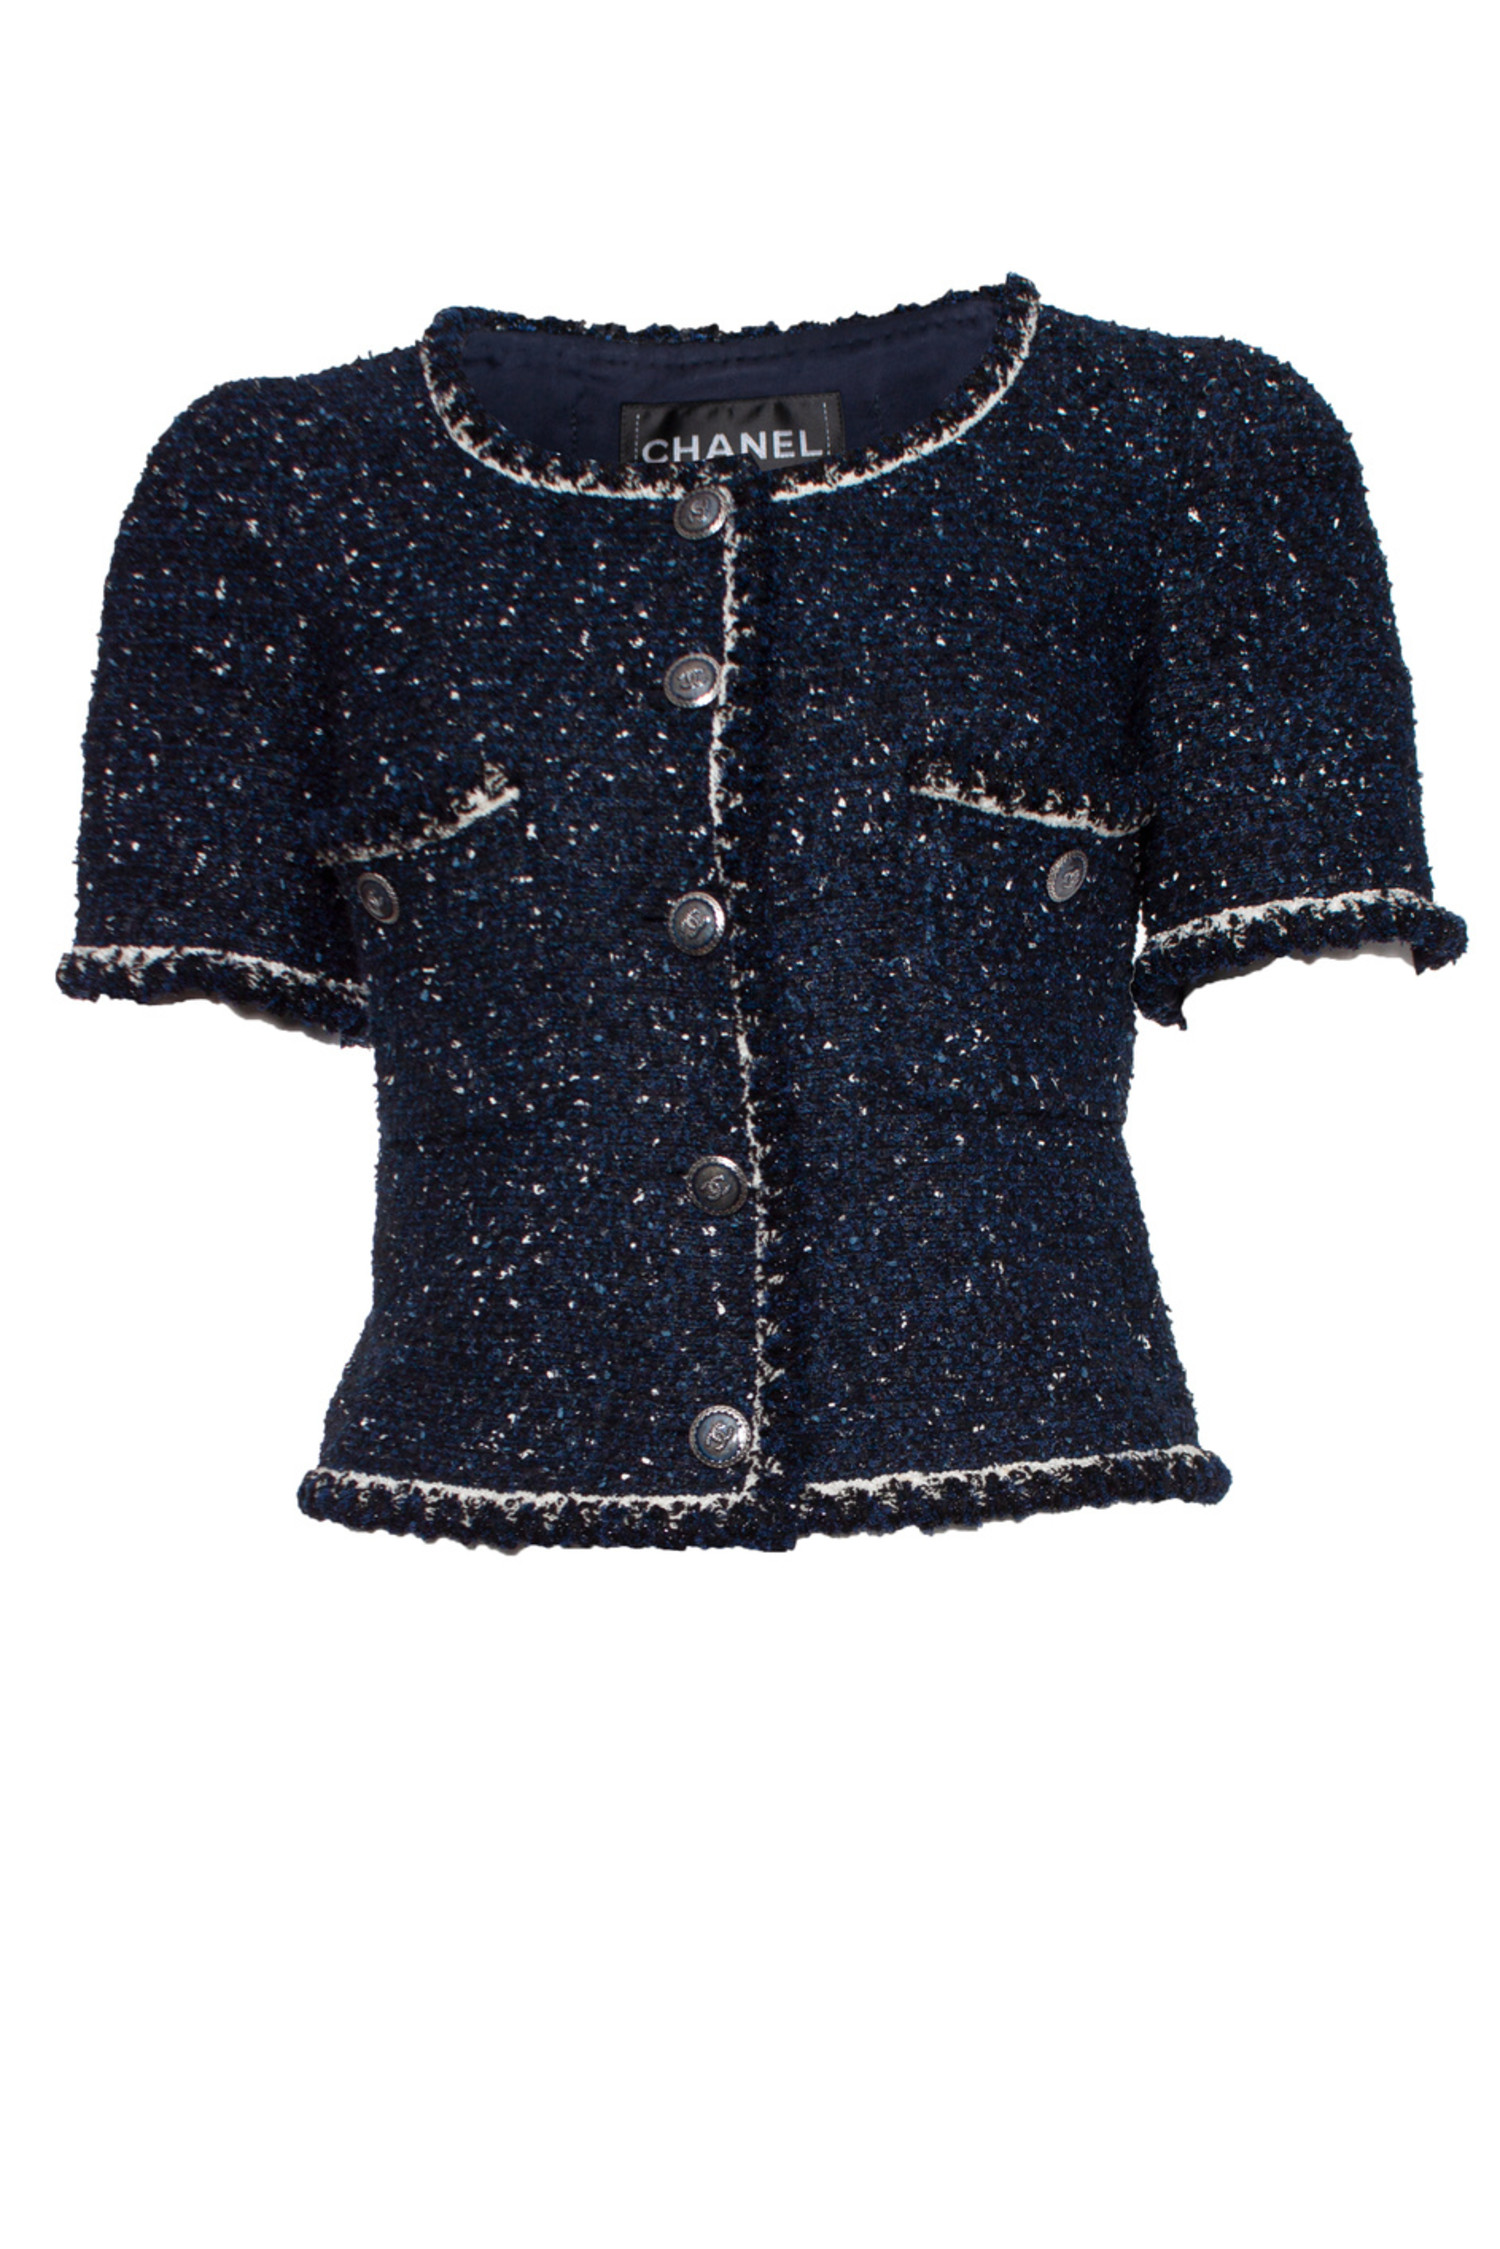 Chanel, Blue boucle jacket with short sleeves - Unique Designer Pieces